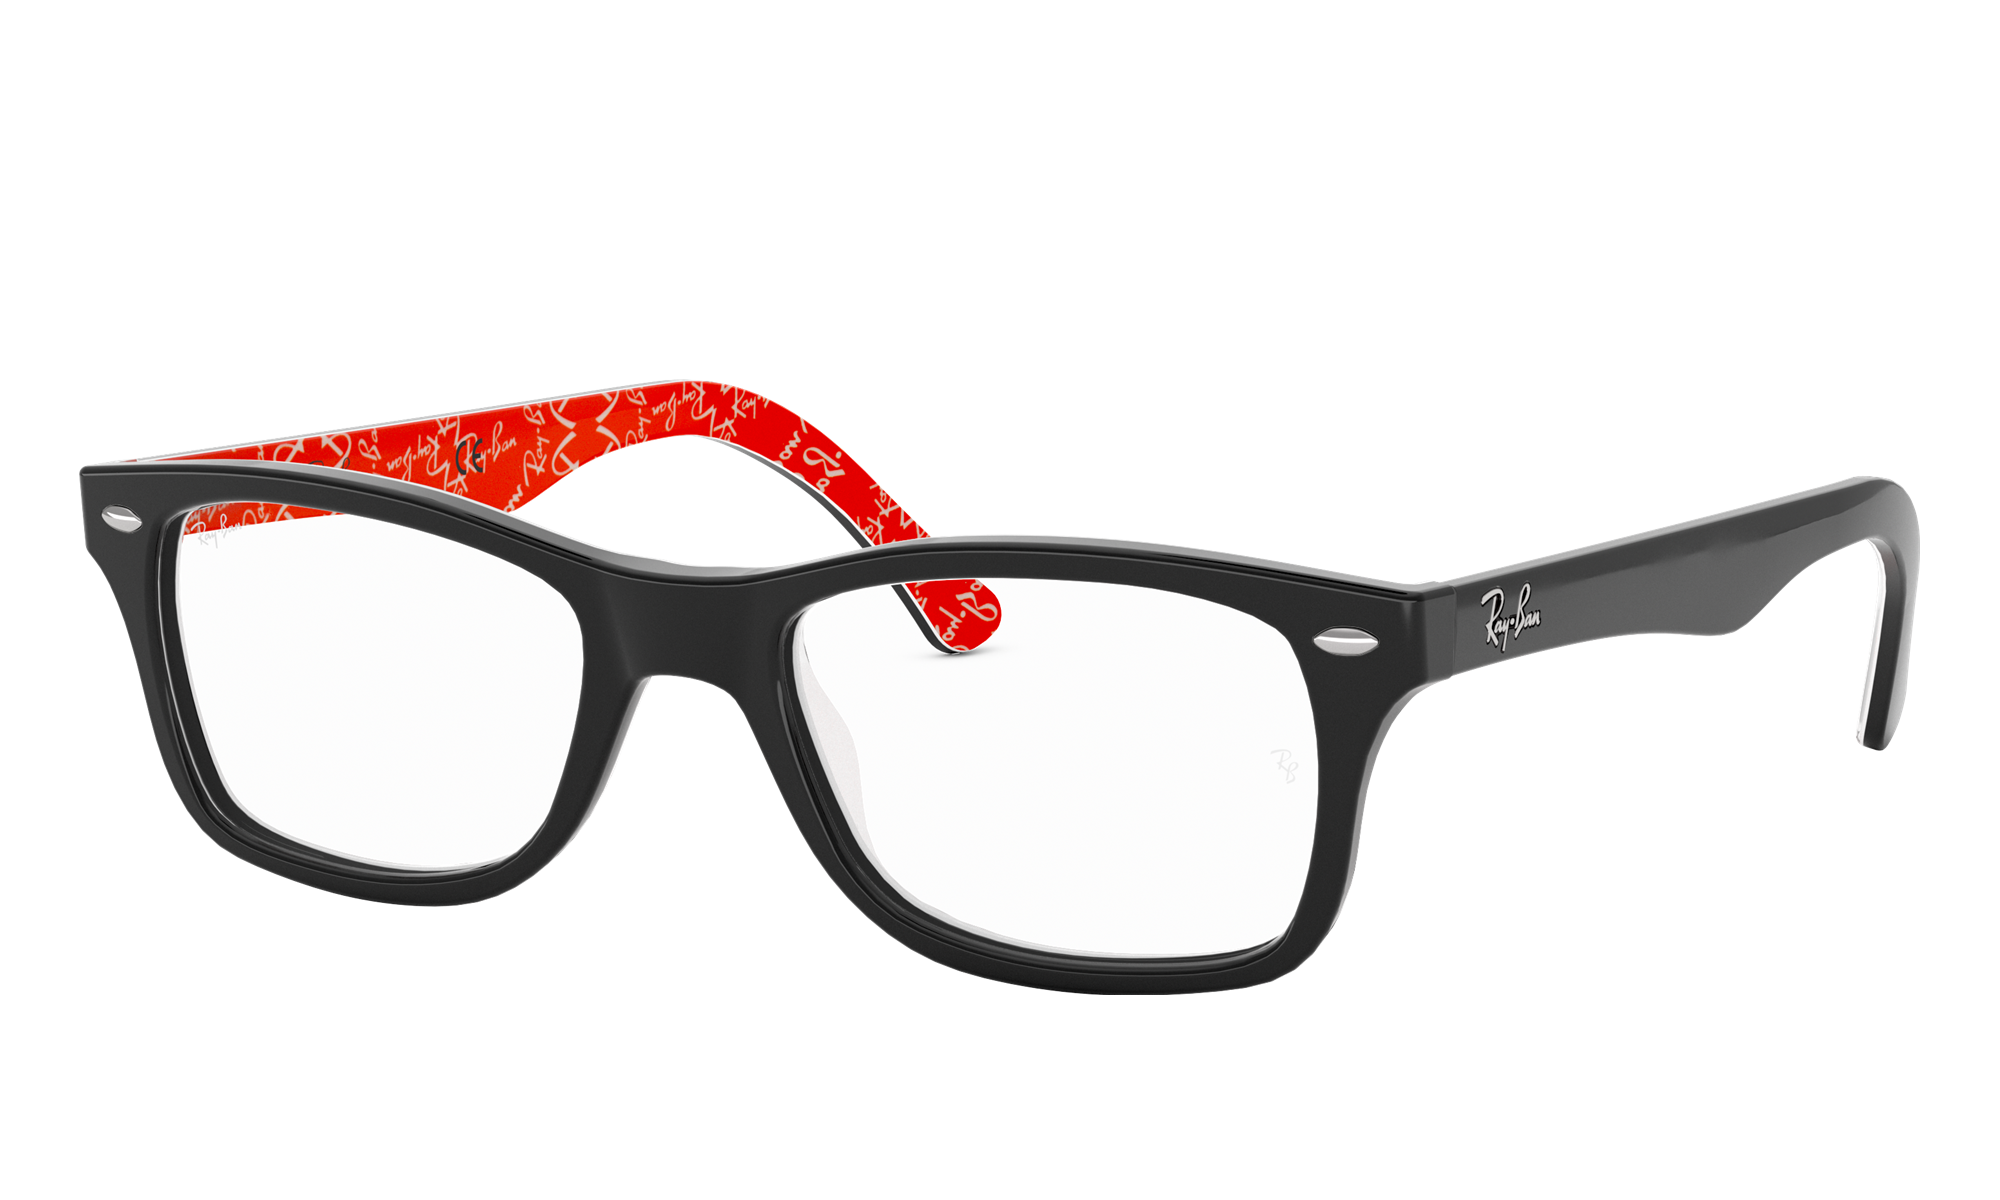 Ray-Ban Unisex Rx5228 Black On Red Size: Standard